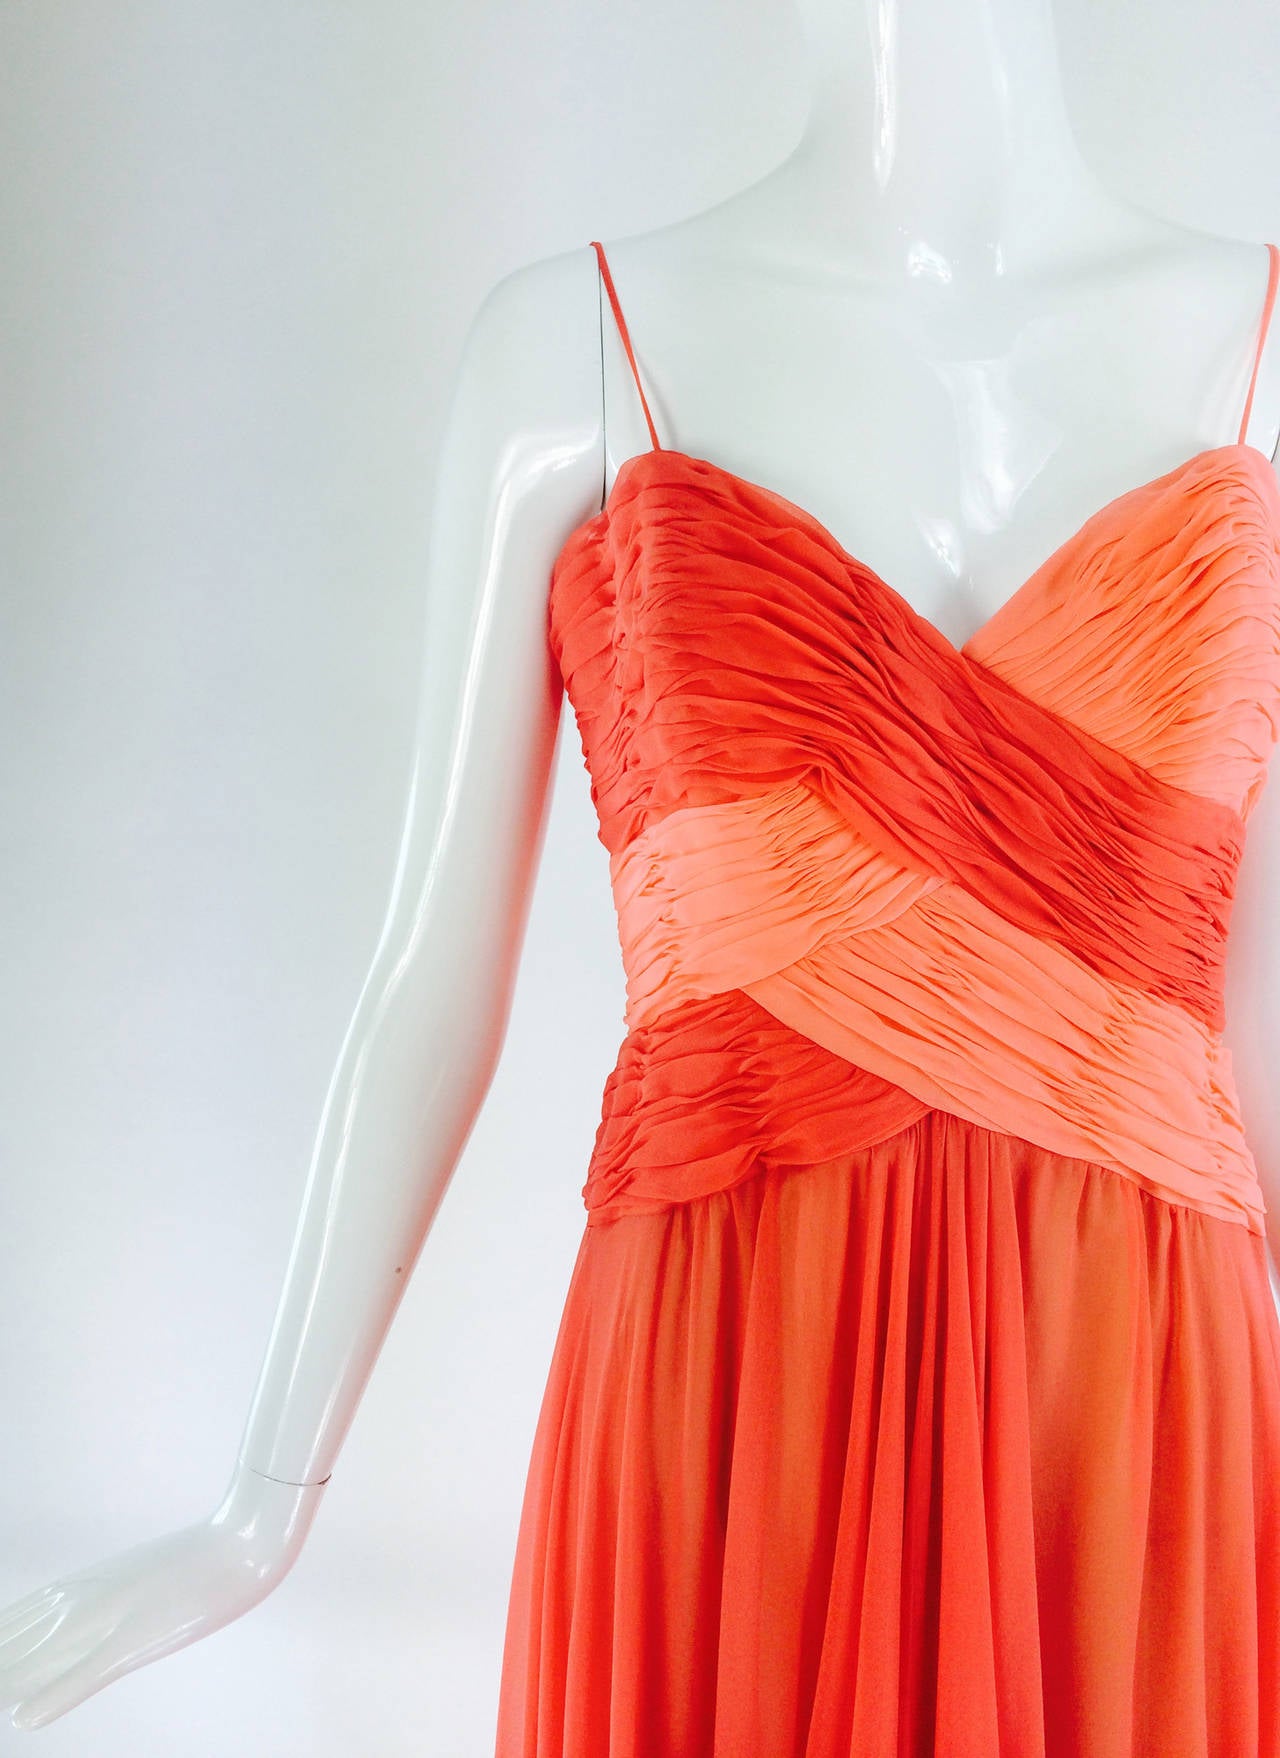 Loris Azzaro goddess gown in coral/peach silk chiffon 1970s...Old Hollywood glamour abounds in this goddess style gown by Loris Azzaro from the 1970s...Silk chiffon in coral and peach are shirred and then woven at the bodice in a design that is